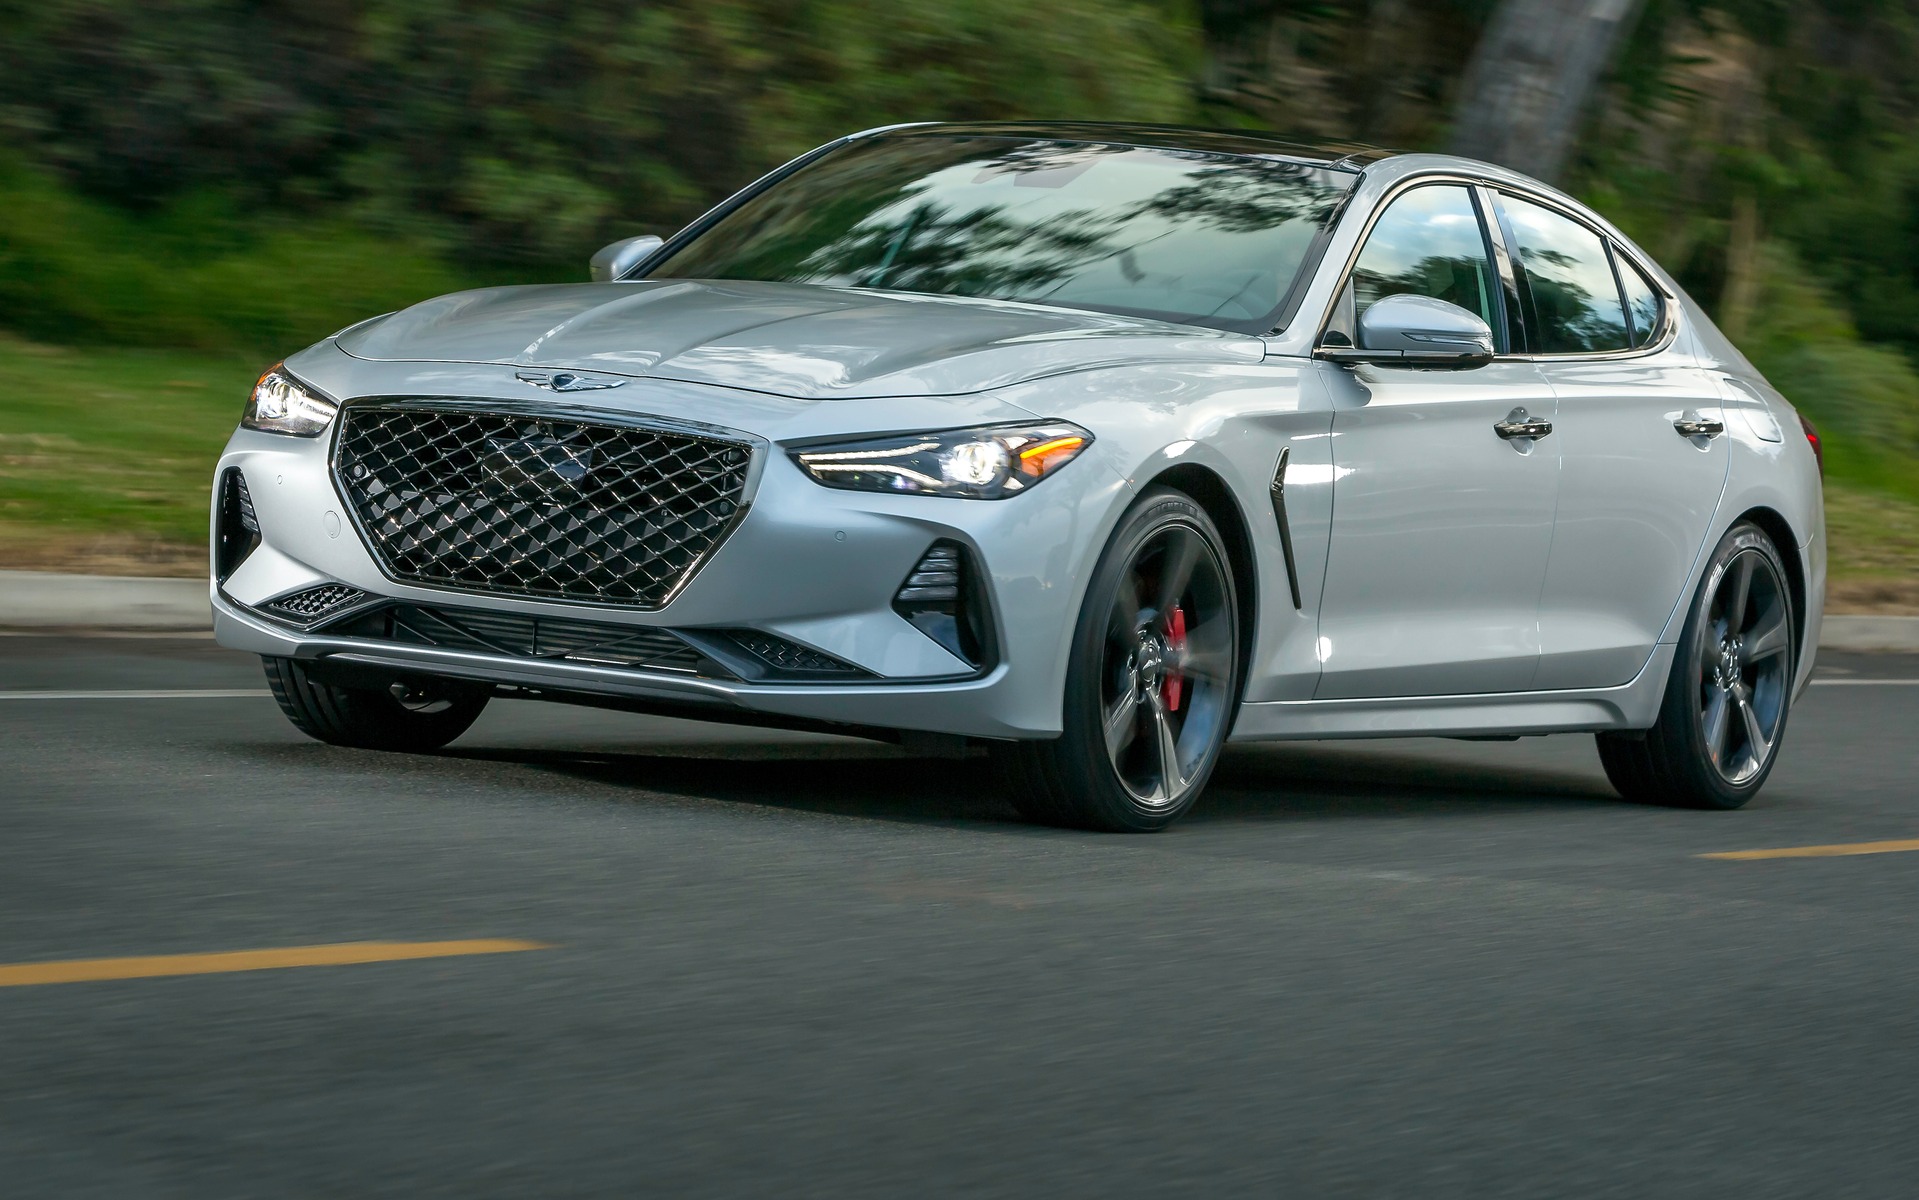 valuation-genesis-g70-2019-guide-auto